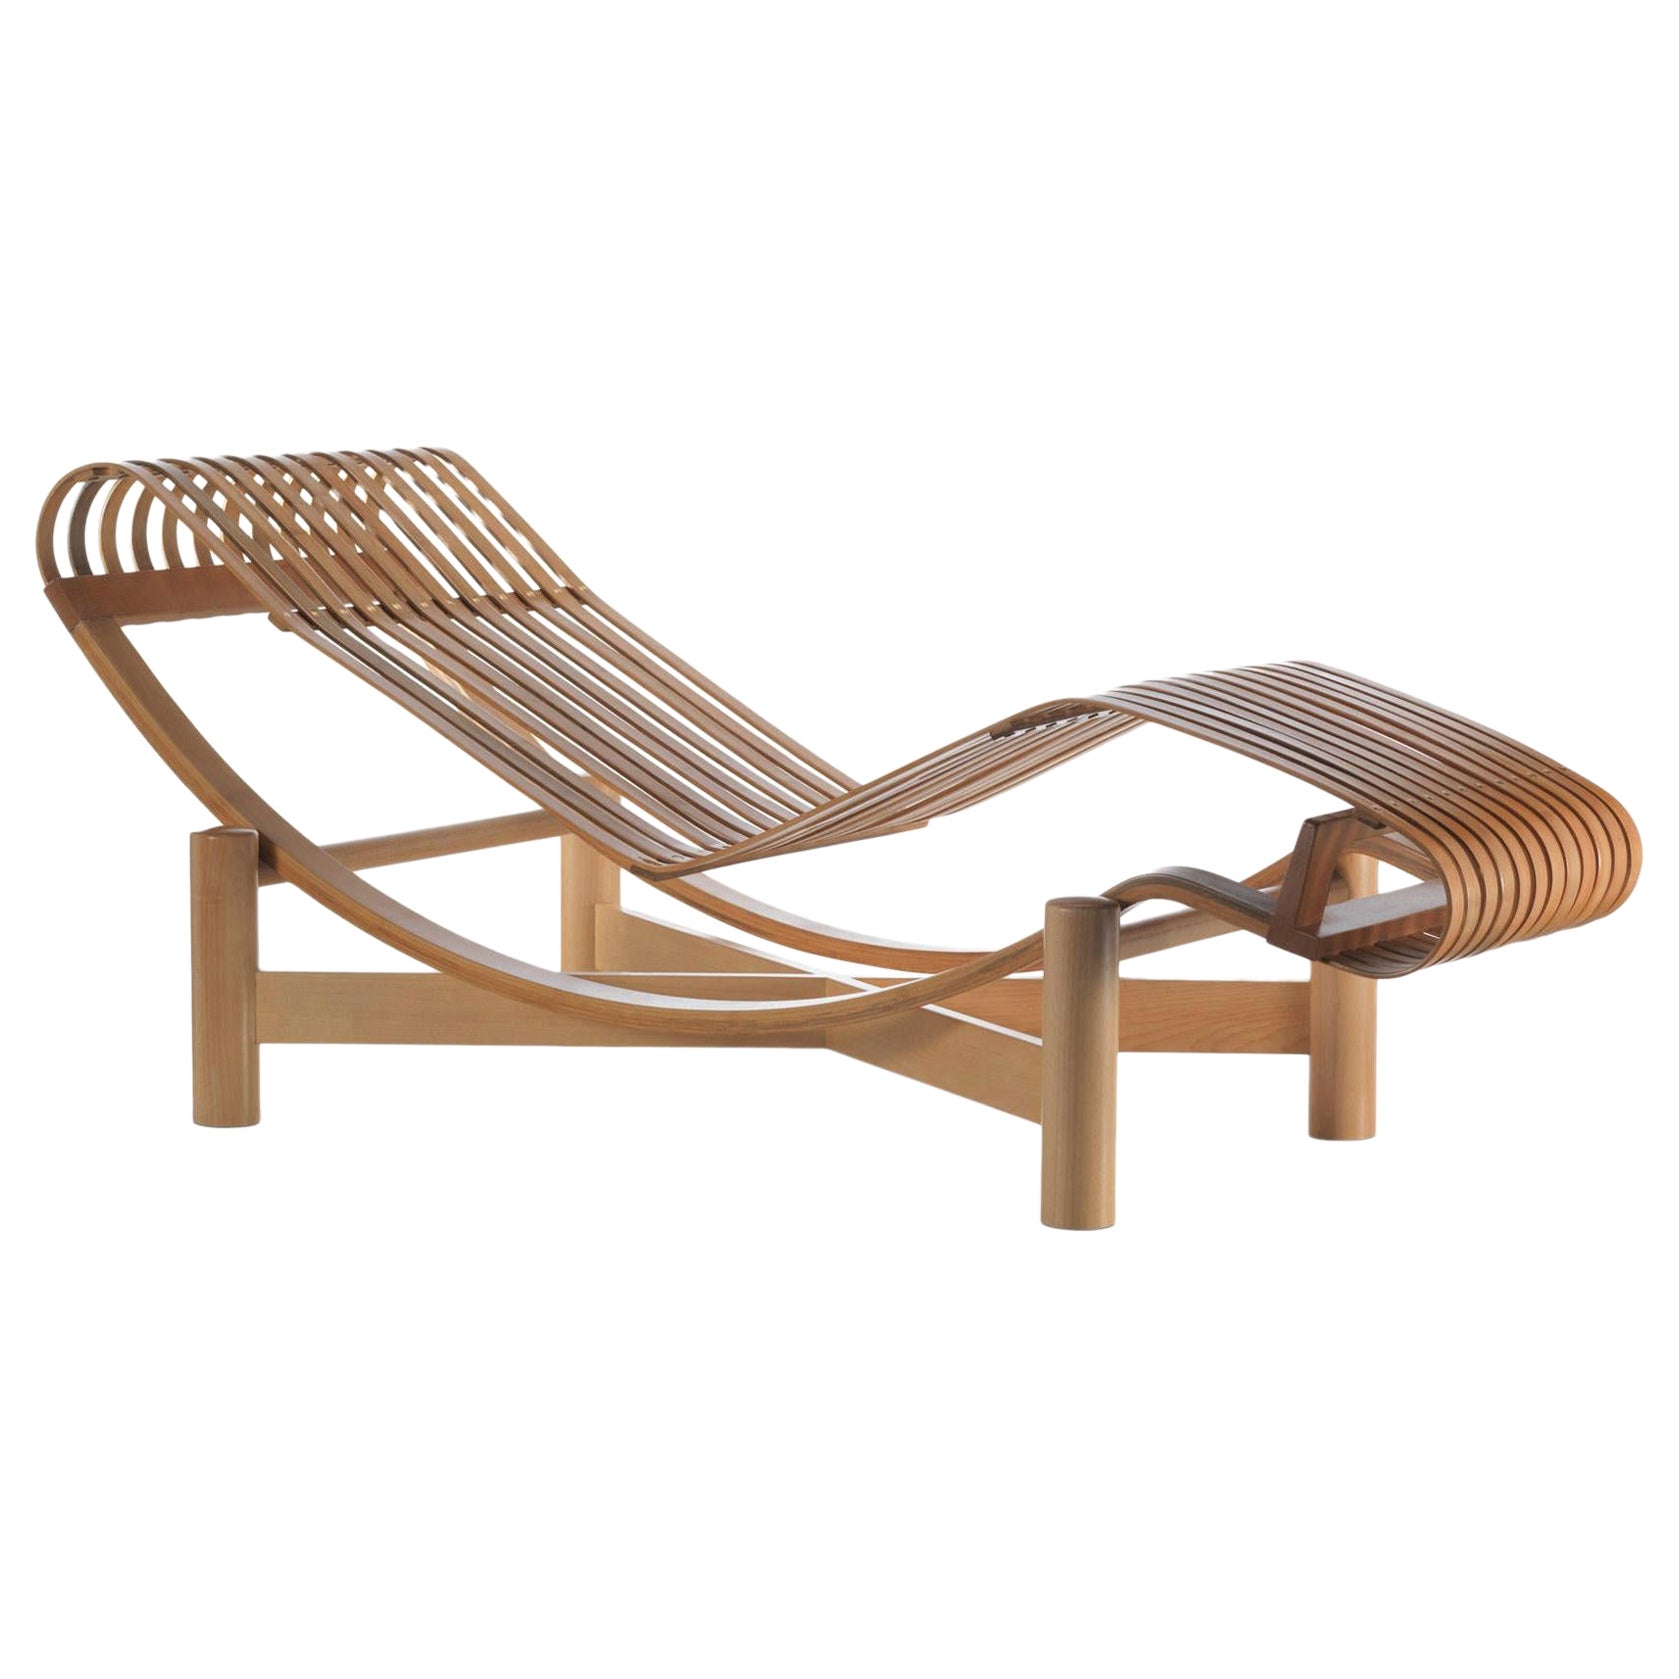 Charlotte Perriand Tokyo Chaise Longue by Cassina 1